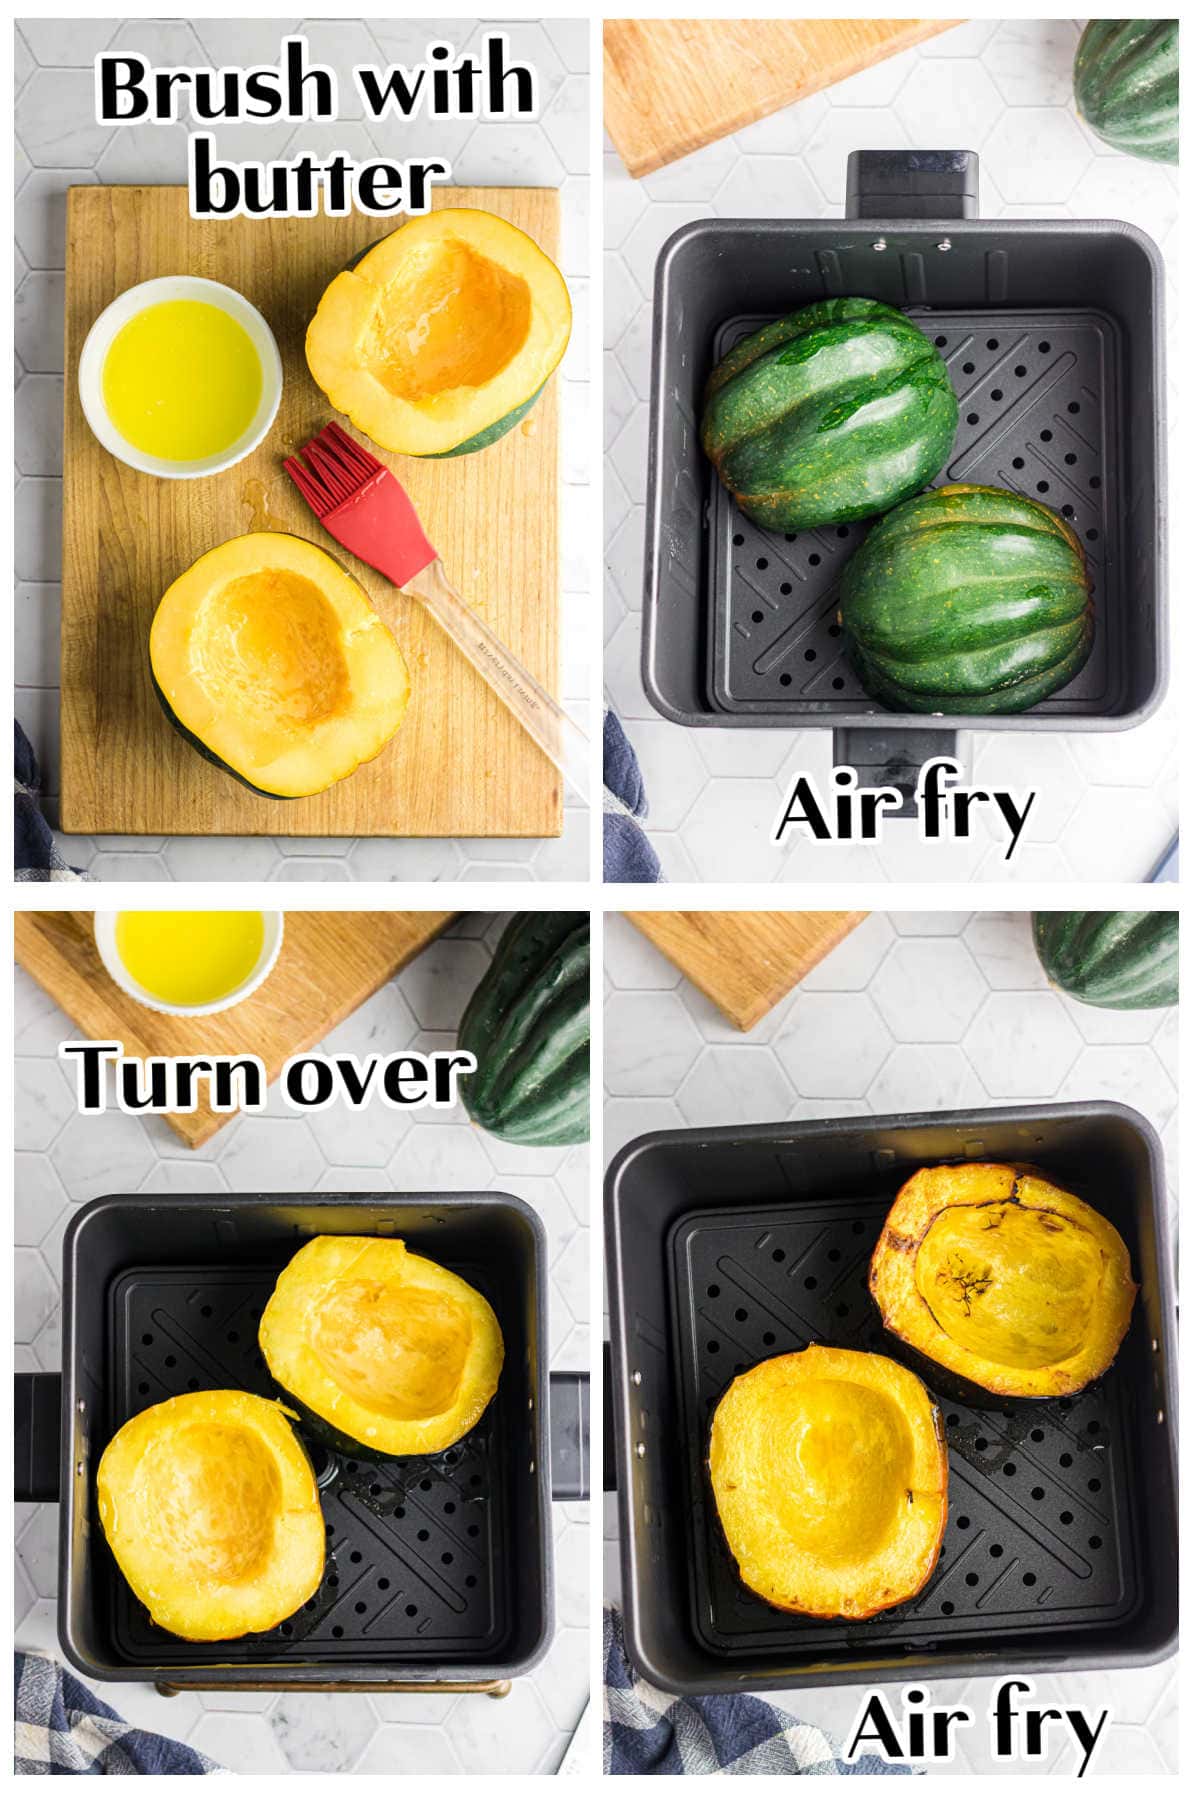 Step by step images showing how to cook the squash in an air fryer.